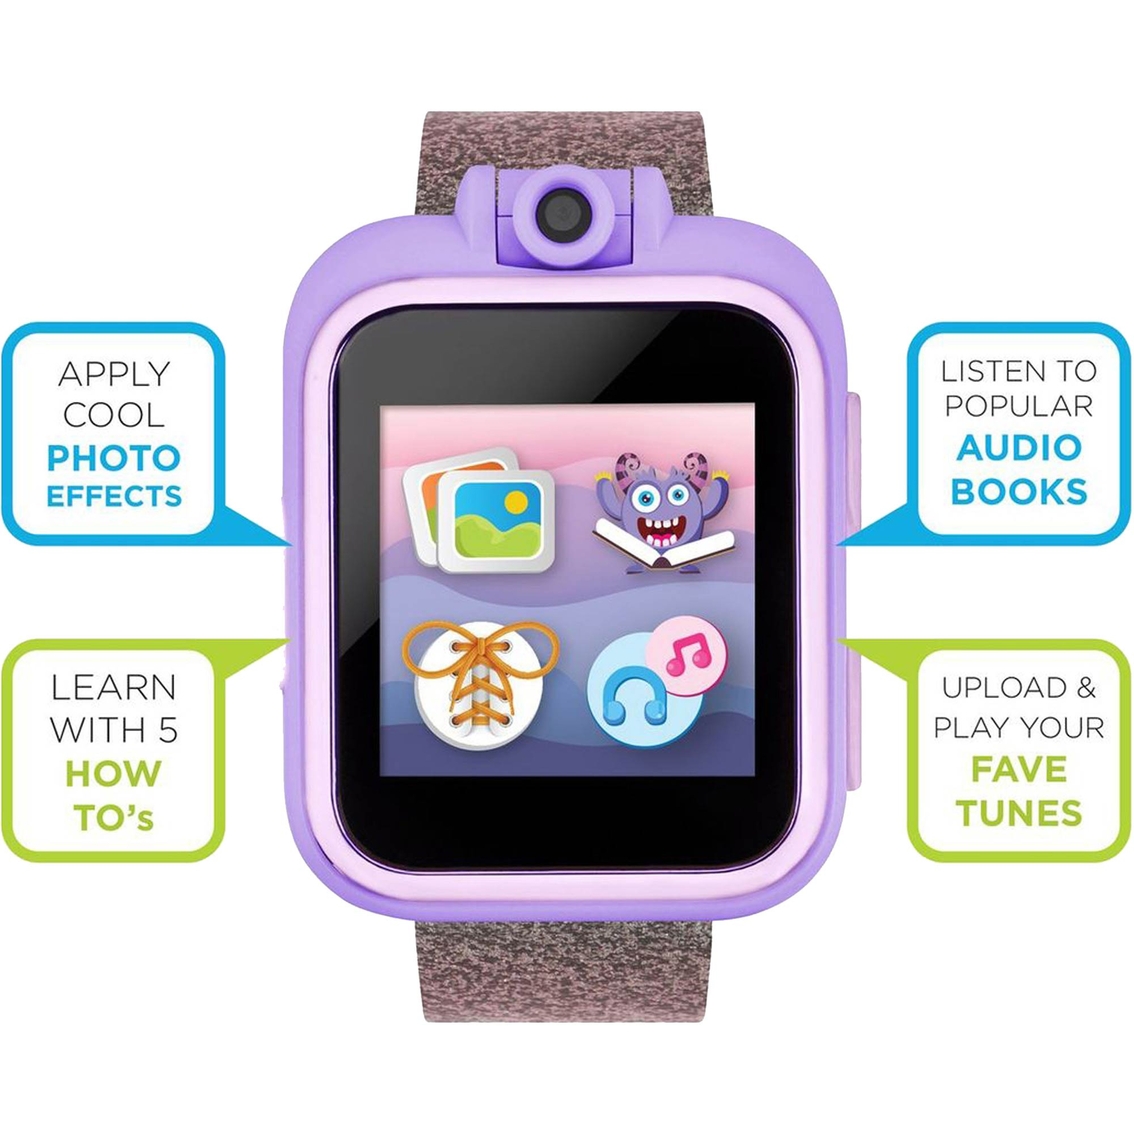 PlayZoom 2 Educational Smartwatch with Headphones: Purple Glitter and Sequin Bow - Image 4 of 7